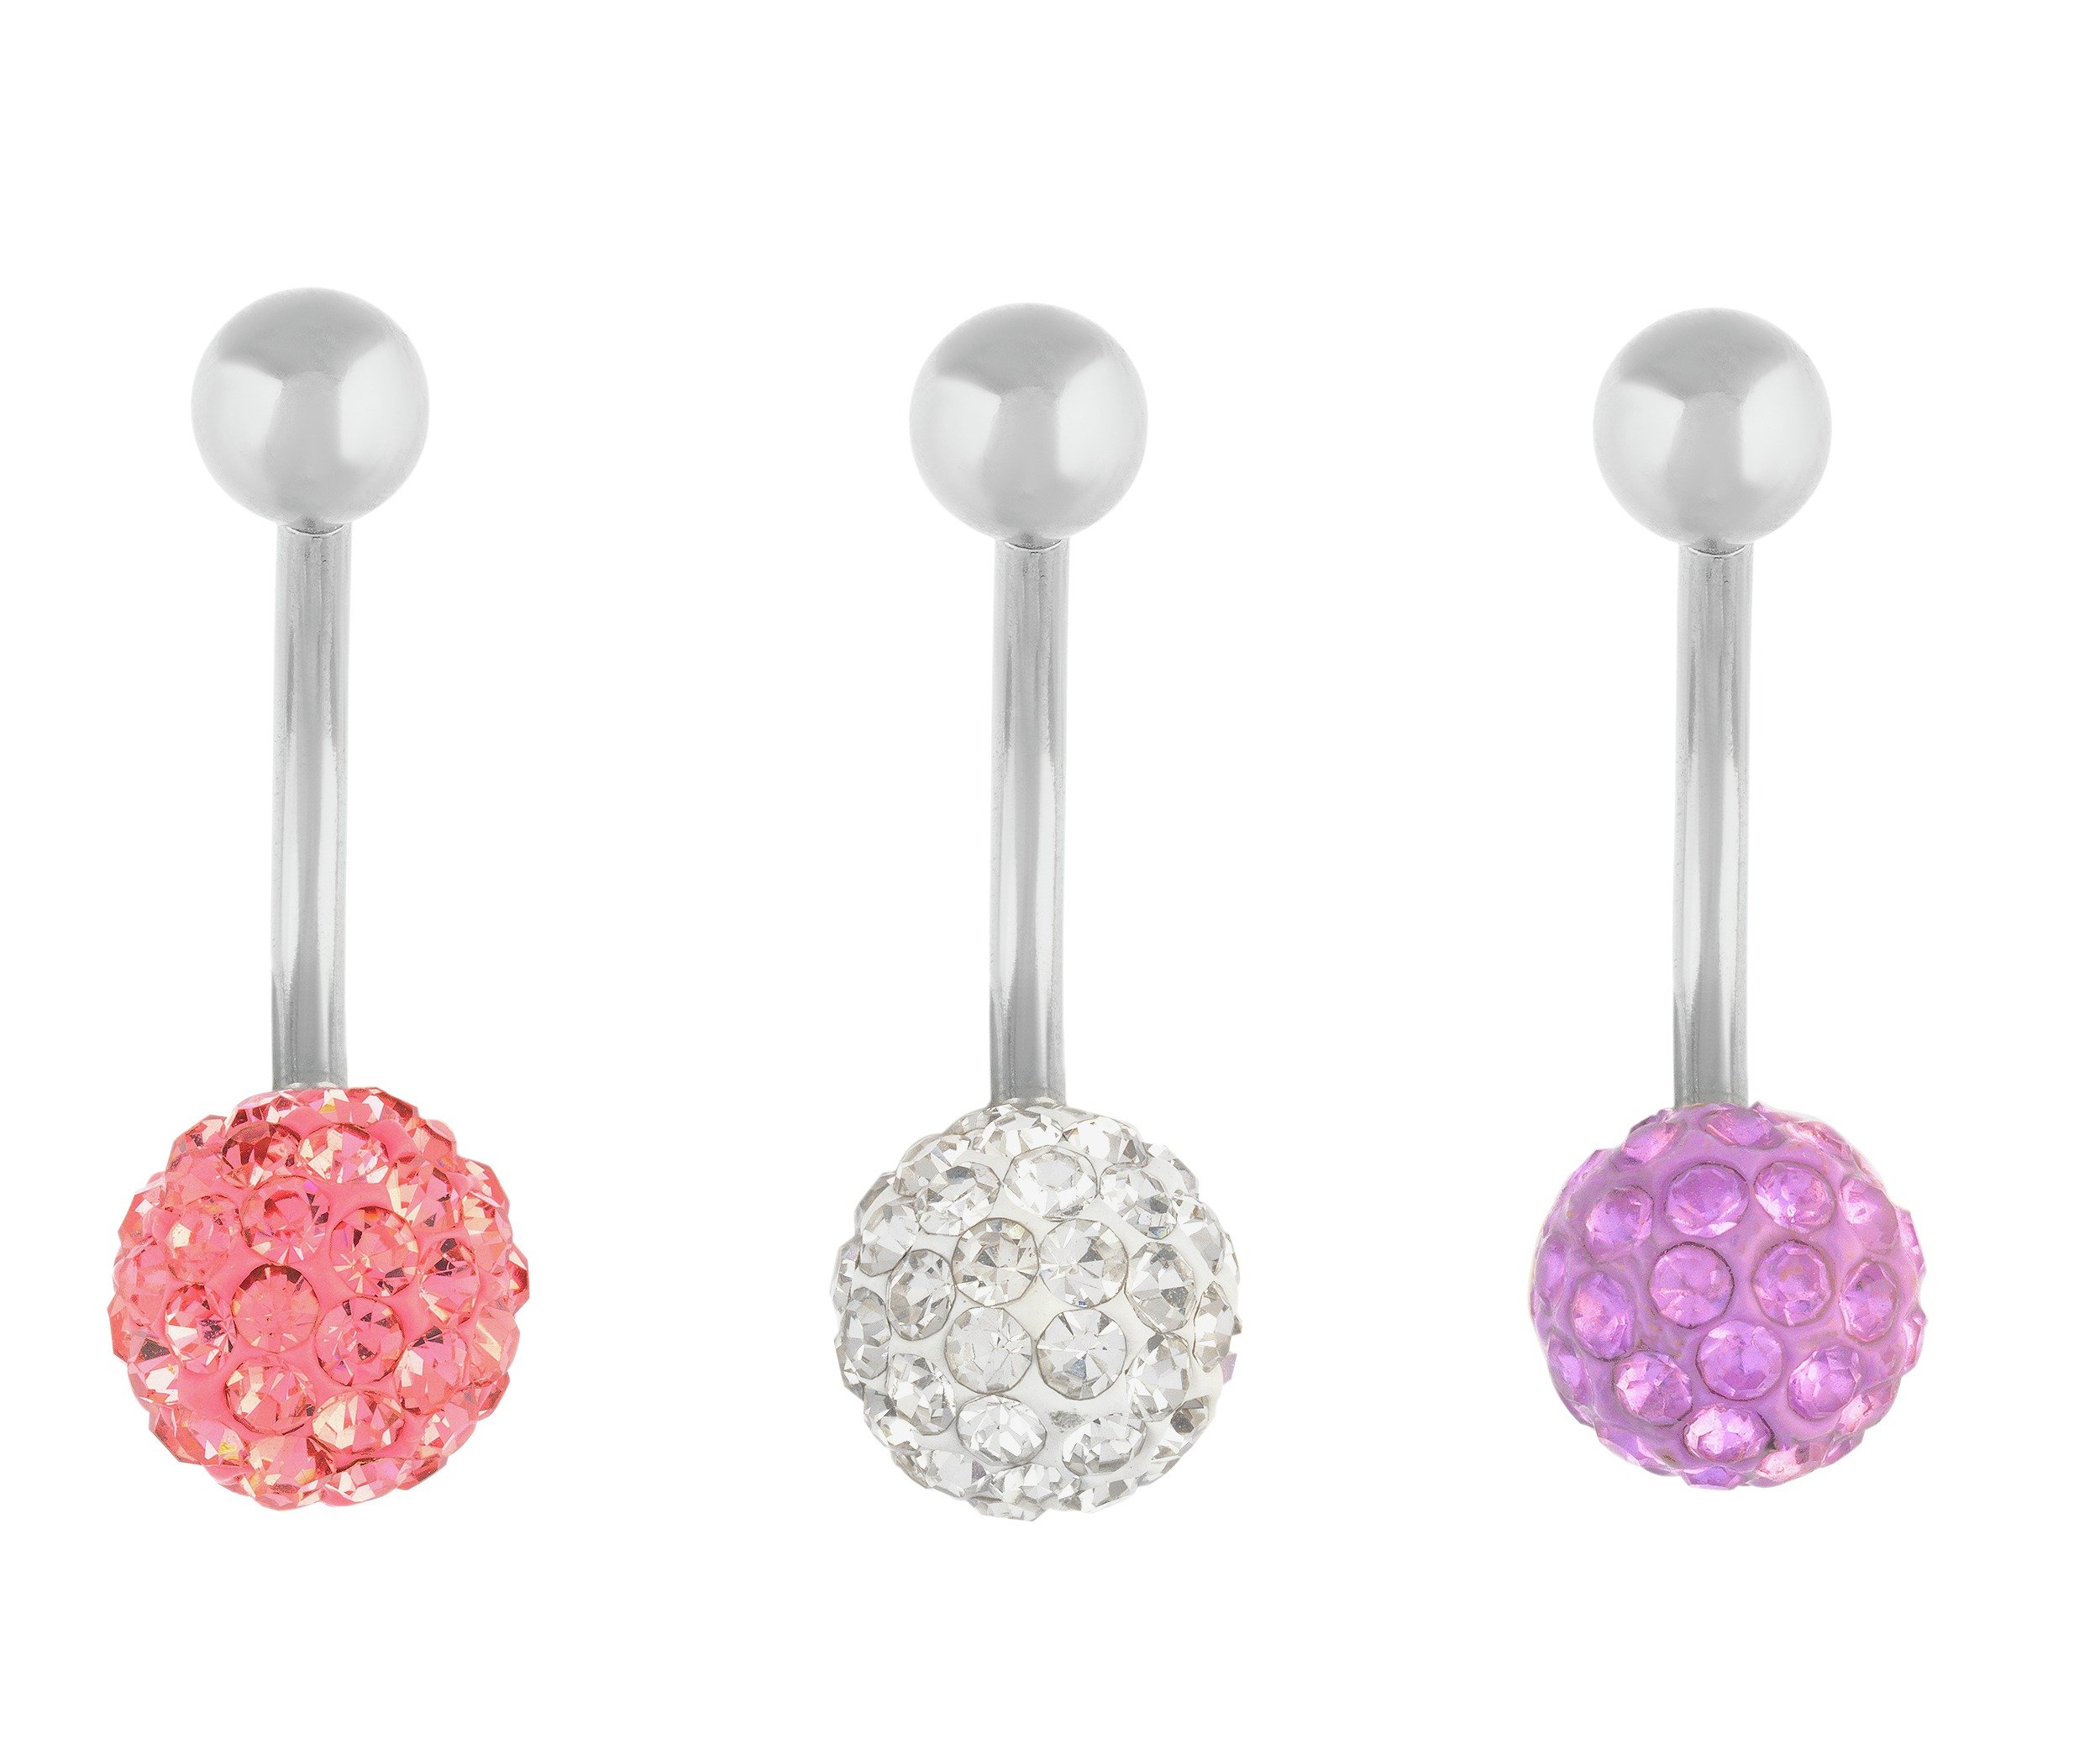 State of Mine Crystal Ball Belly Bars - Set of 3